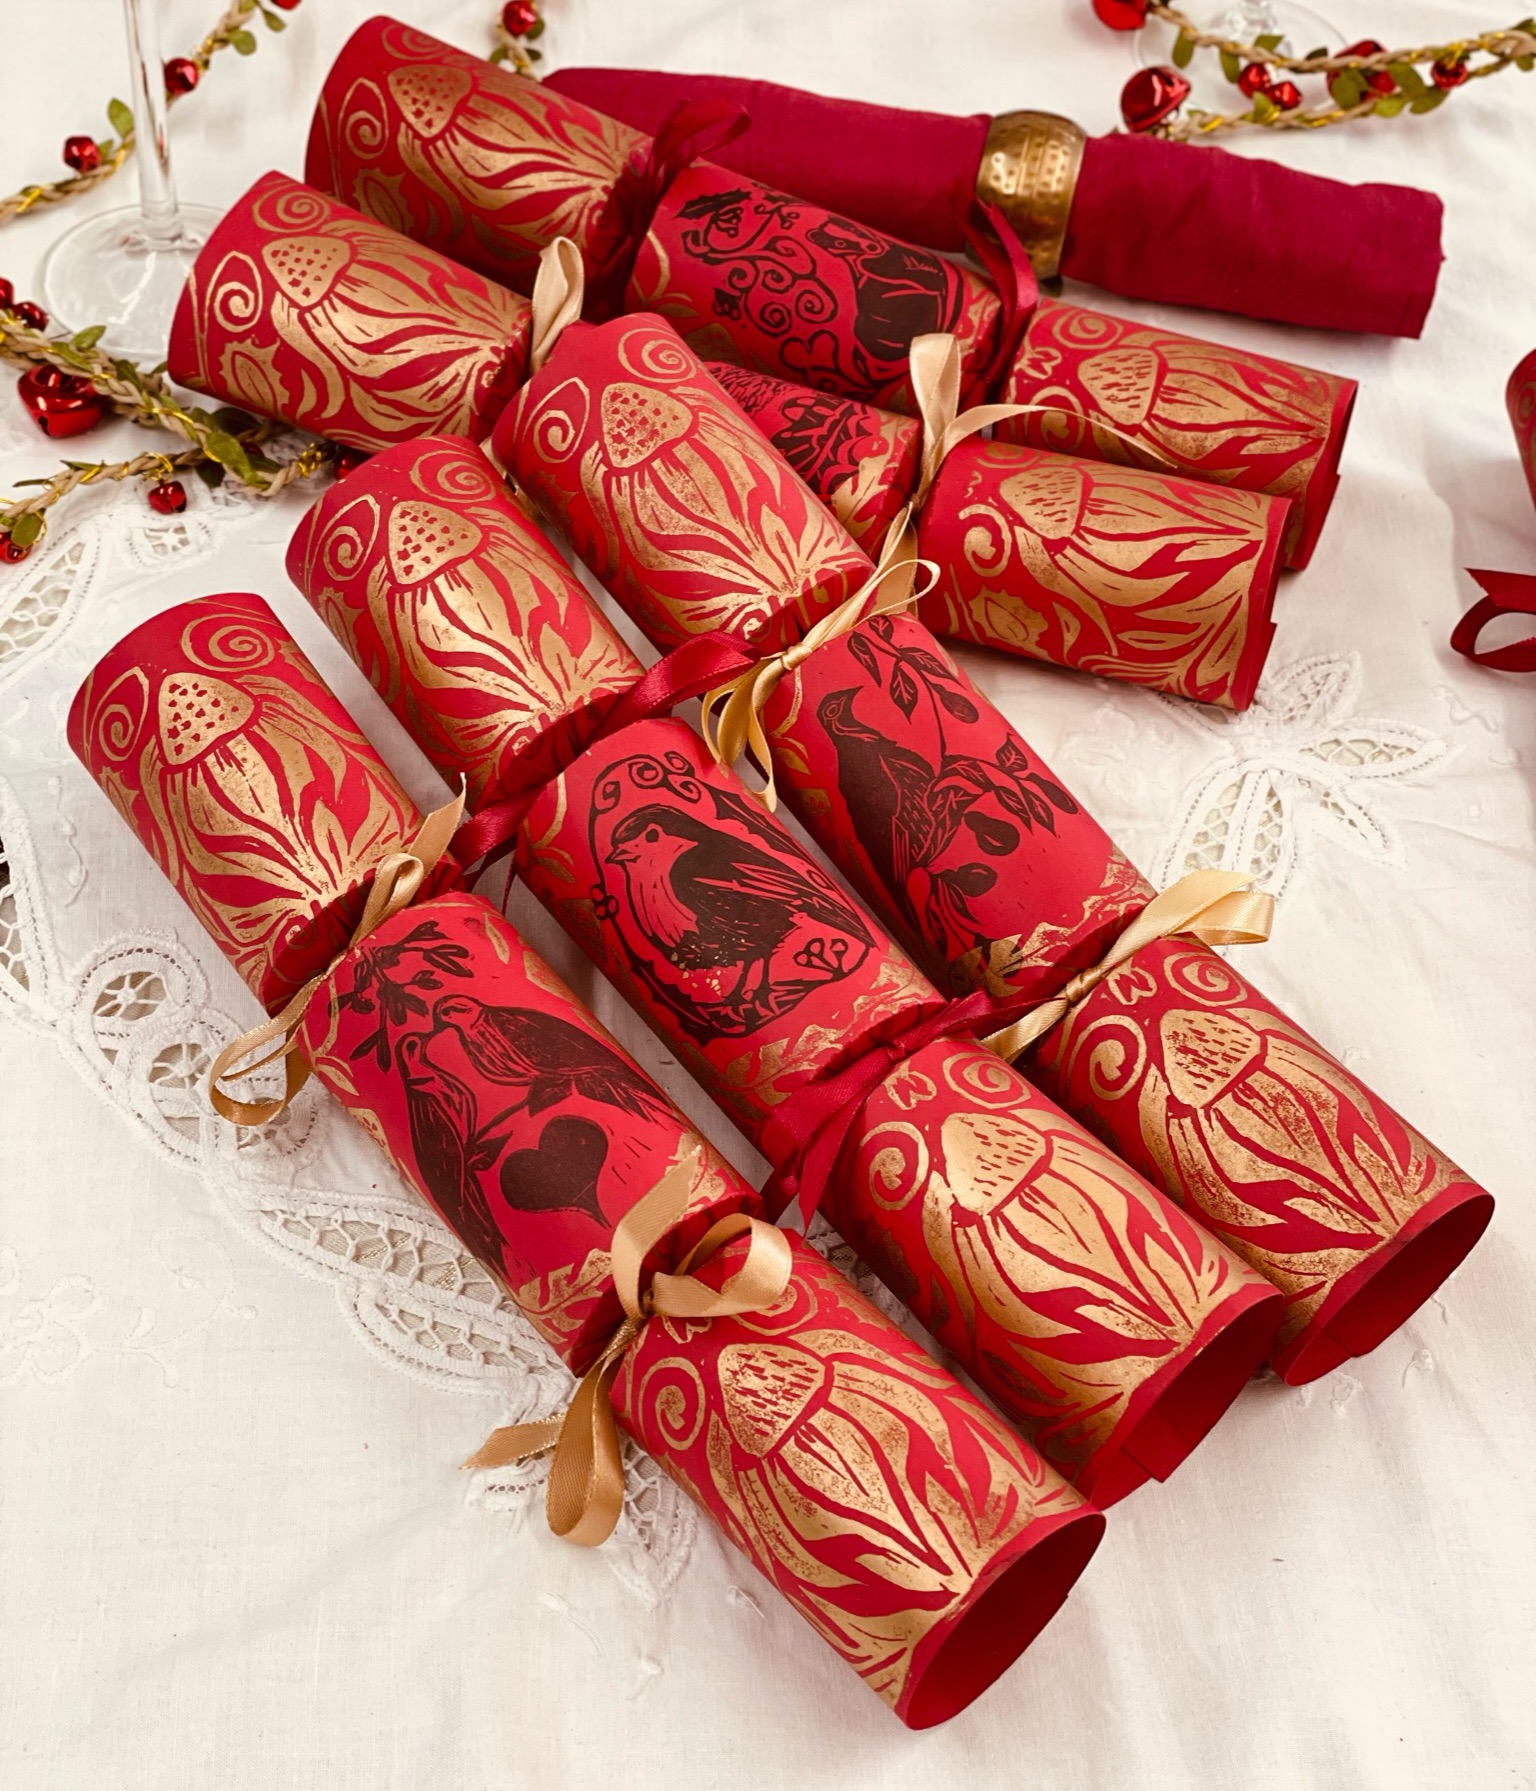 Four Luxury Christmas Gift Crackers